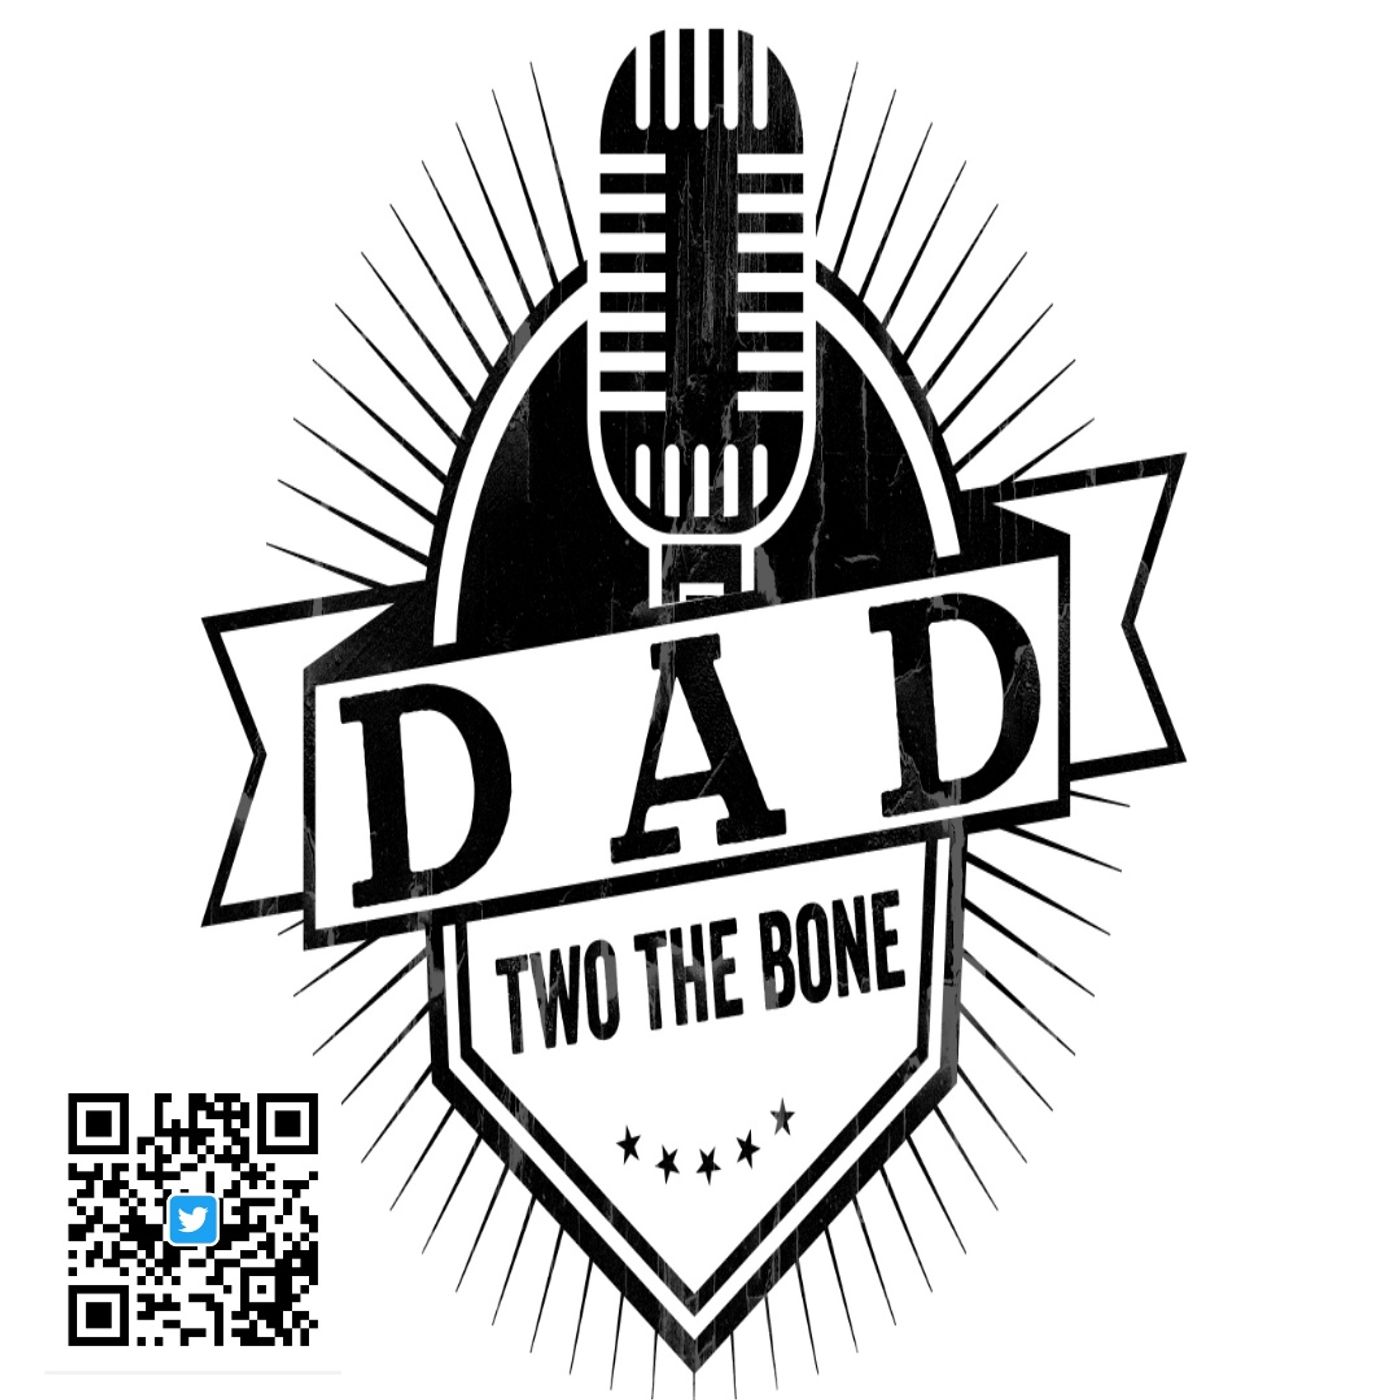 Dad Two the bone